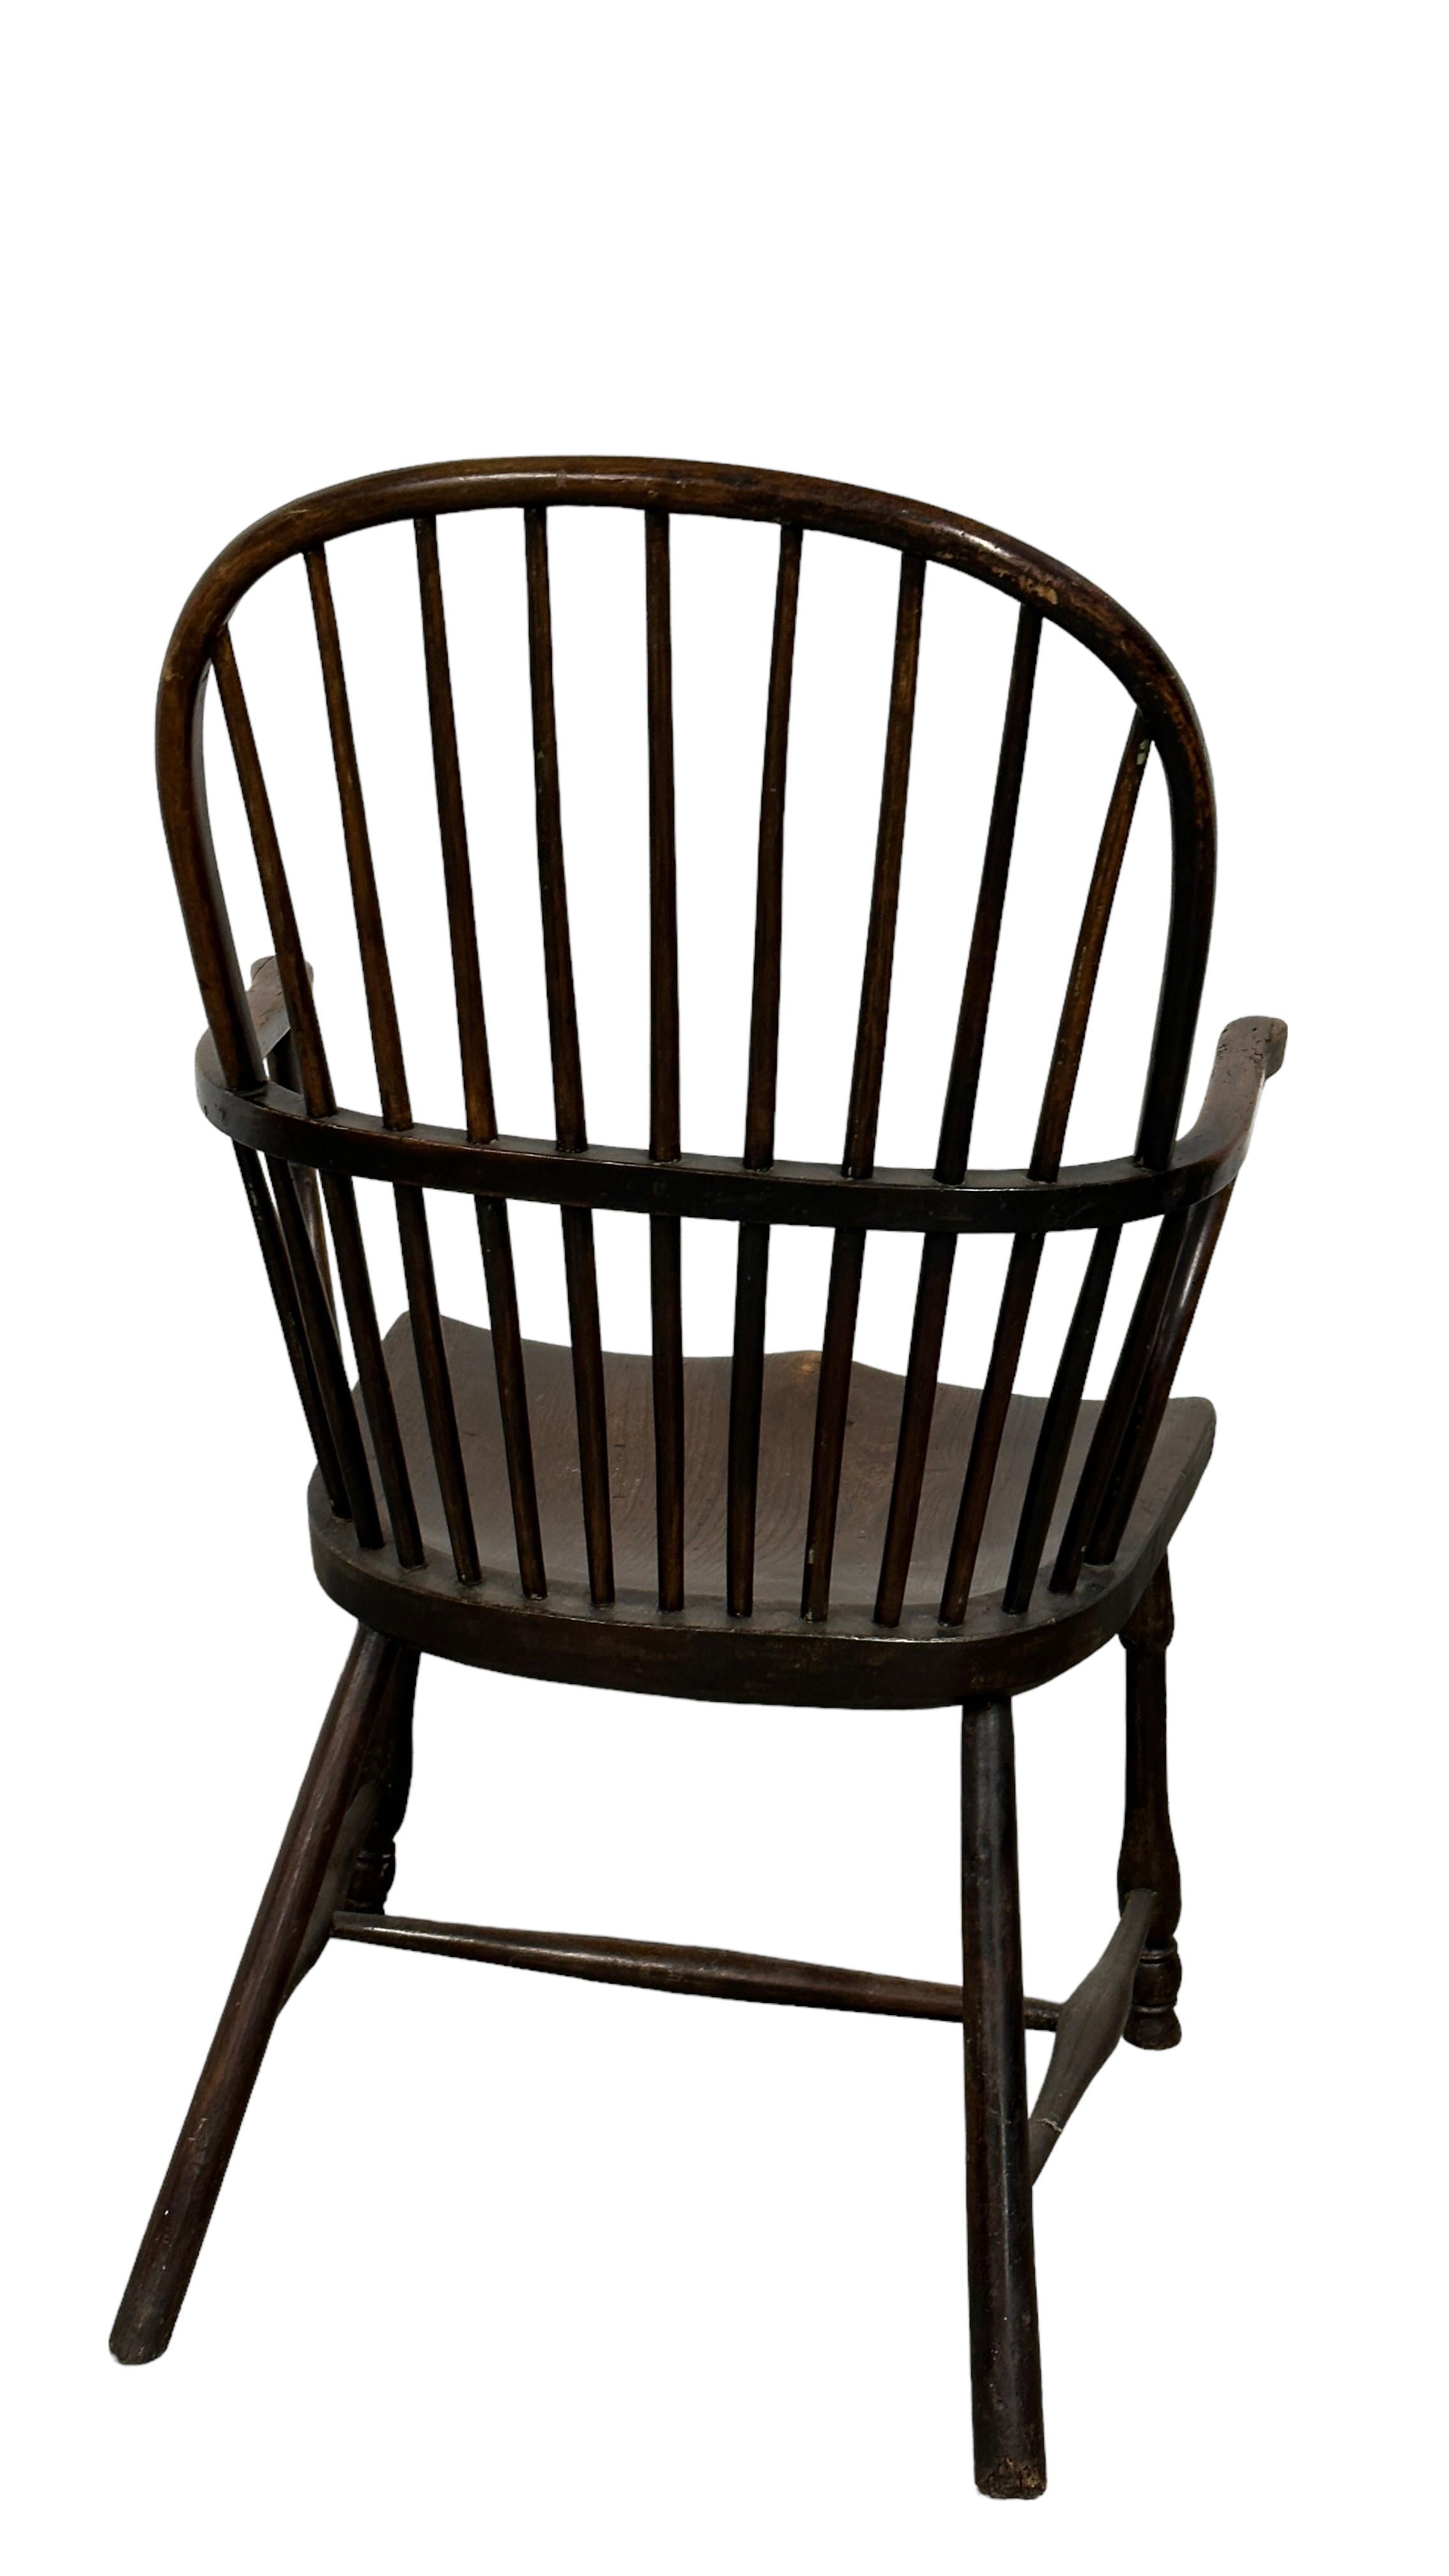 Beautiful Antique Windsor Wooden Chair, 19th Century, England 7